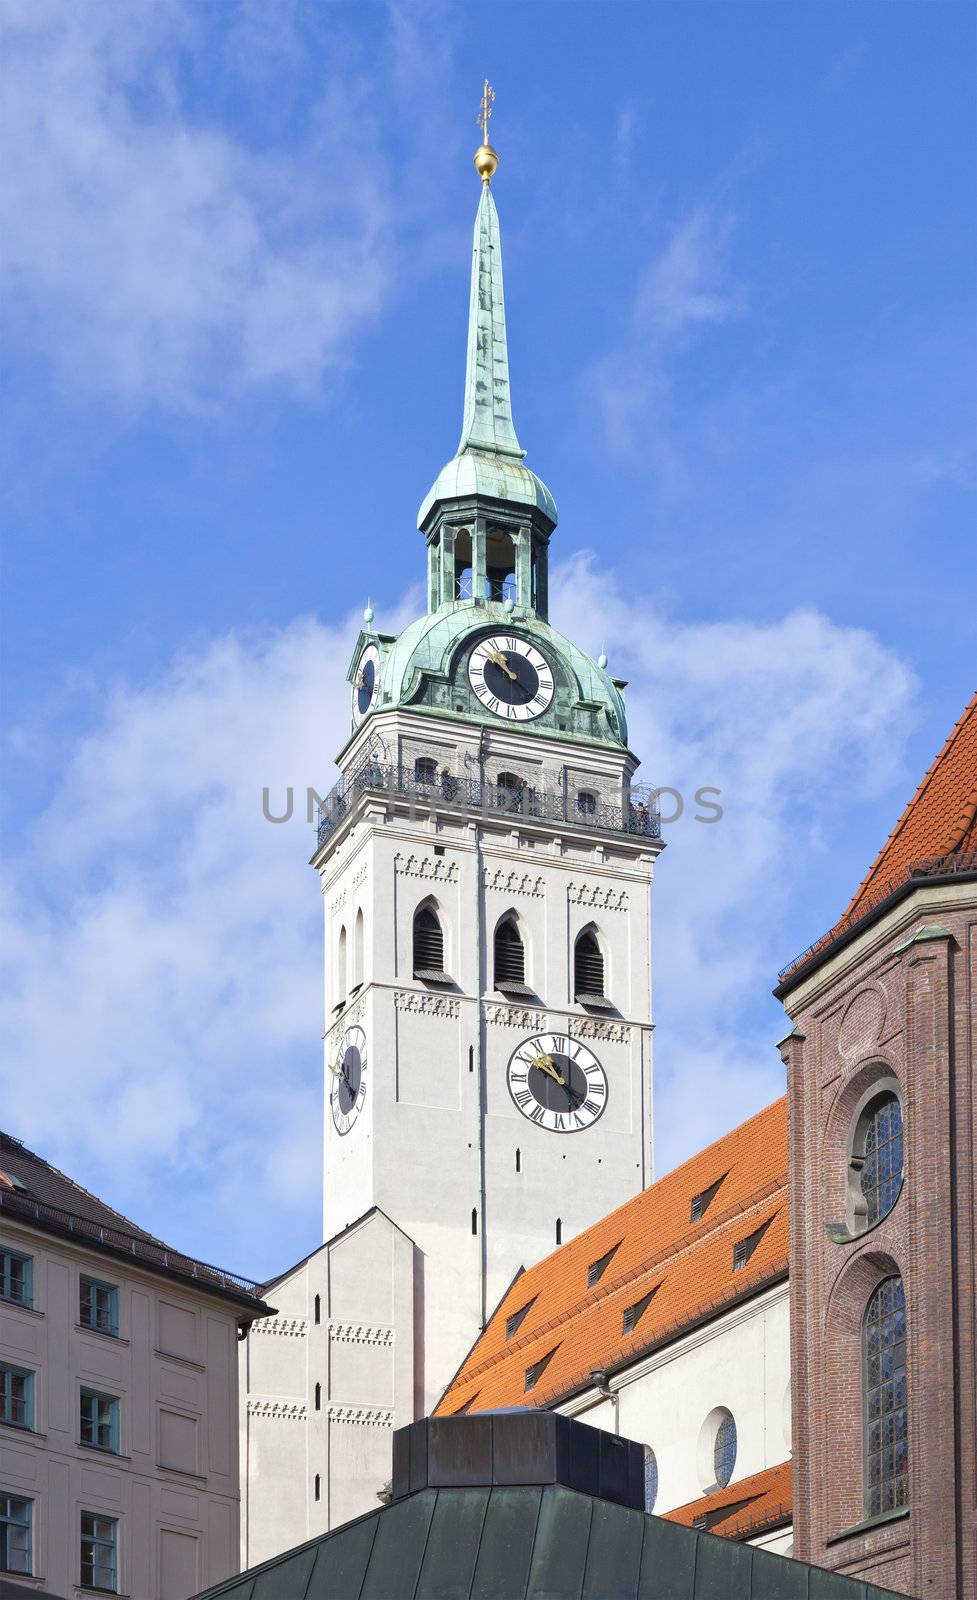 An image of the "alter Peter" church in Munich